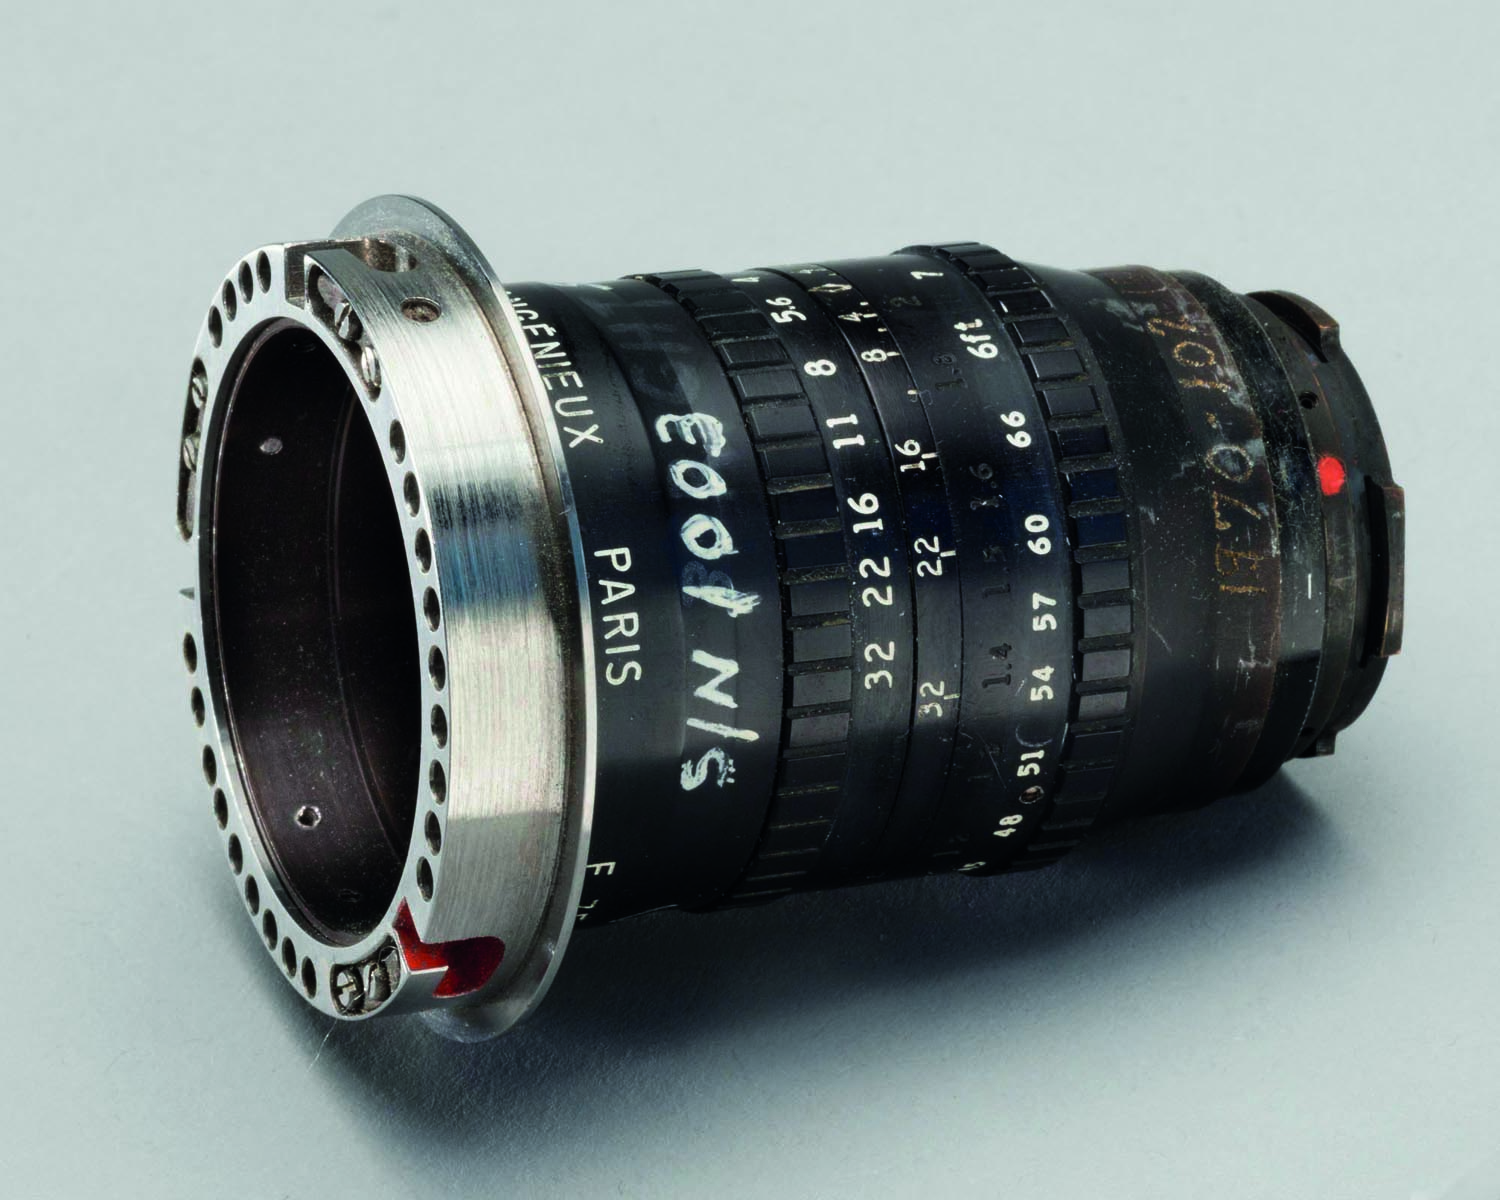 Large camera lens with video equipment, red filter, ANGENIEUX AND CINEMA From Light to Image in white and yellow font below